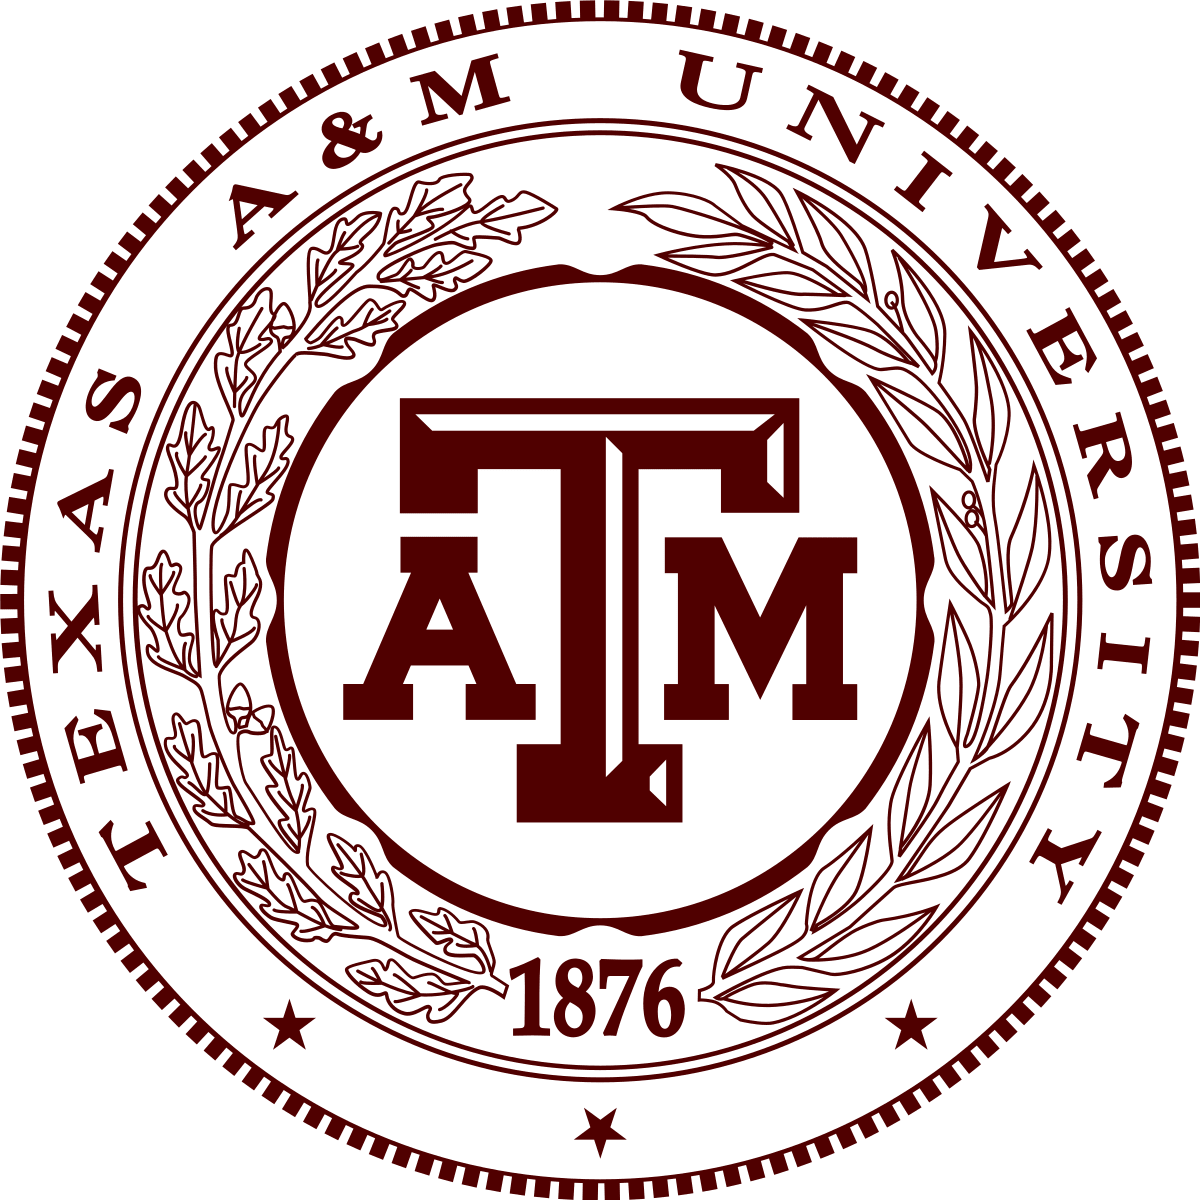 Texas A&M-Kingsville seeks teachers to participate in STEM research